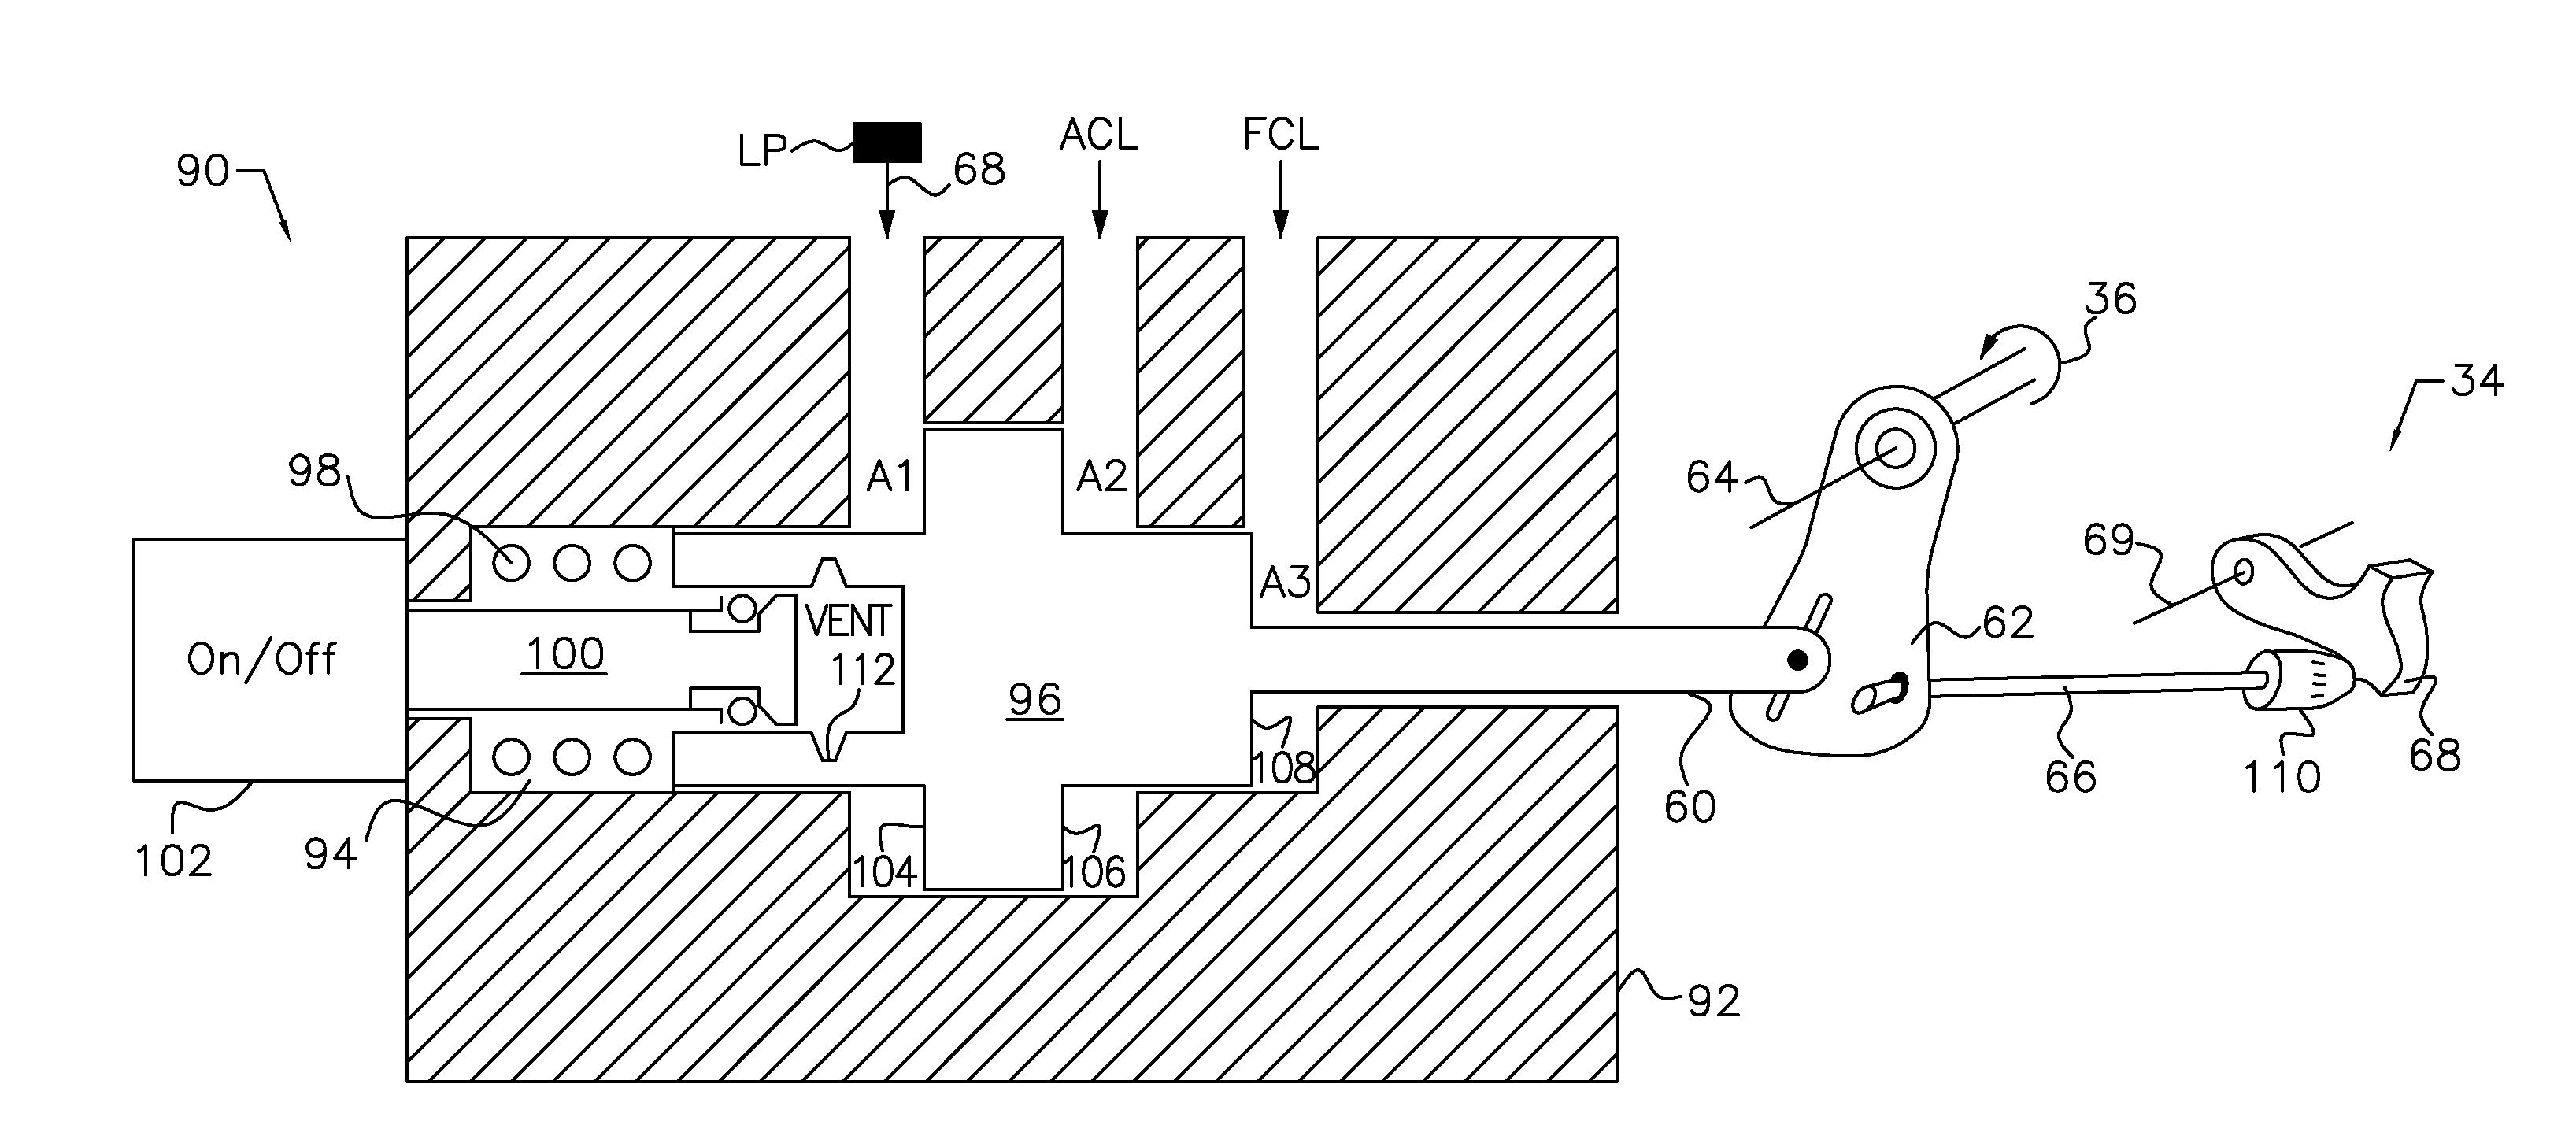 Shift-by-wire actuation of a transmission park brake